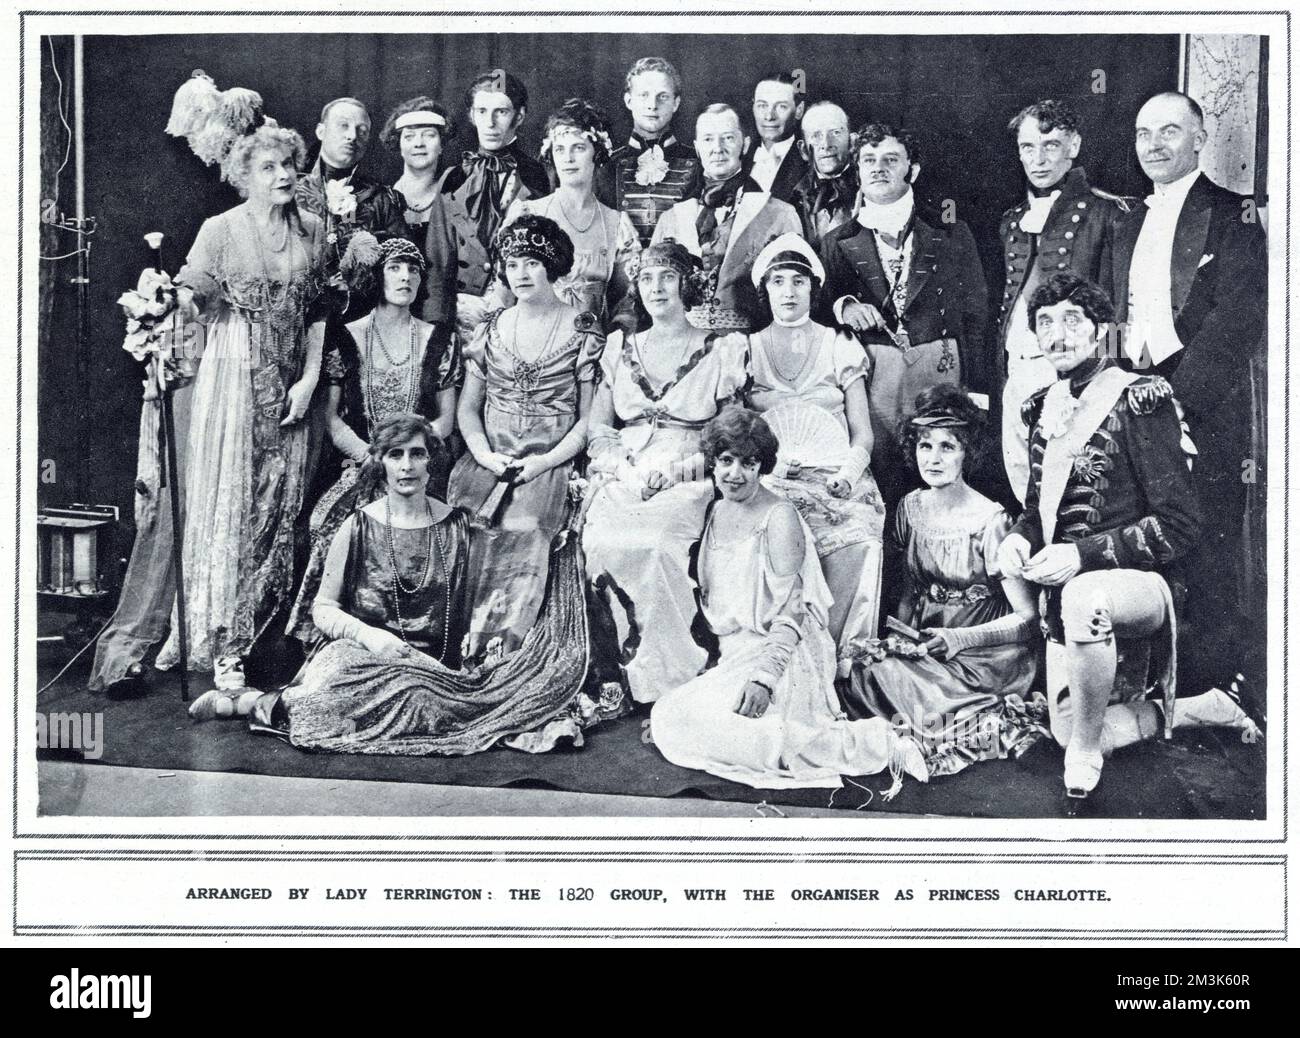 Group of revellers at the Princess Mary Hospital Ball.  This group were all dressed as figures from 1820 with the ball organiser, Lady Terrington (centre), dressed as Princess Charlotte. Stock Photo